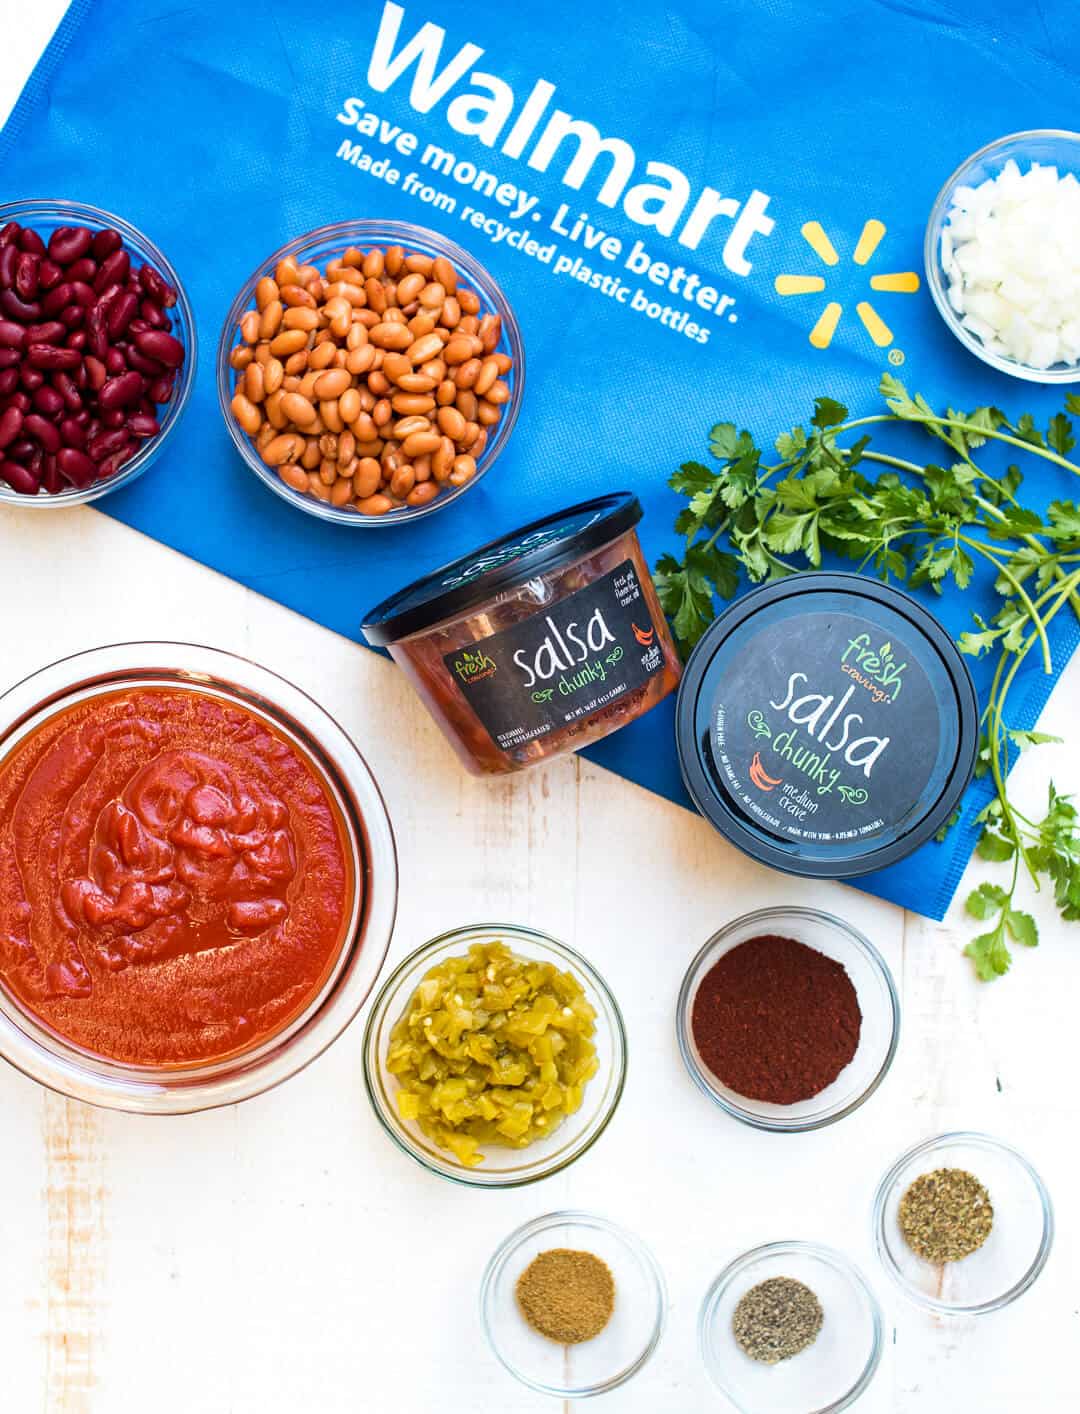 The ingredients for Slow Cooker Salsa Chili including Fresh Cravings Salsa on a blue Walmart shopping bag.